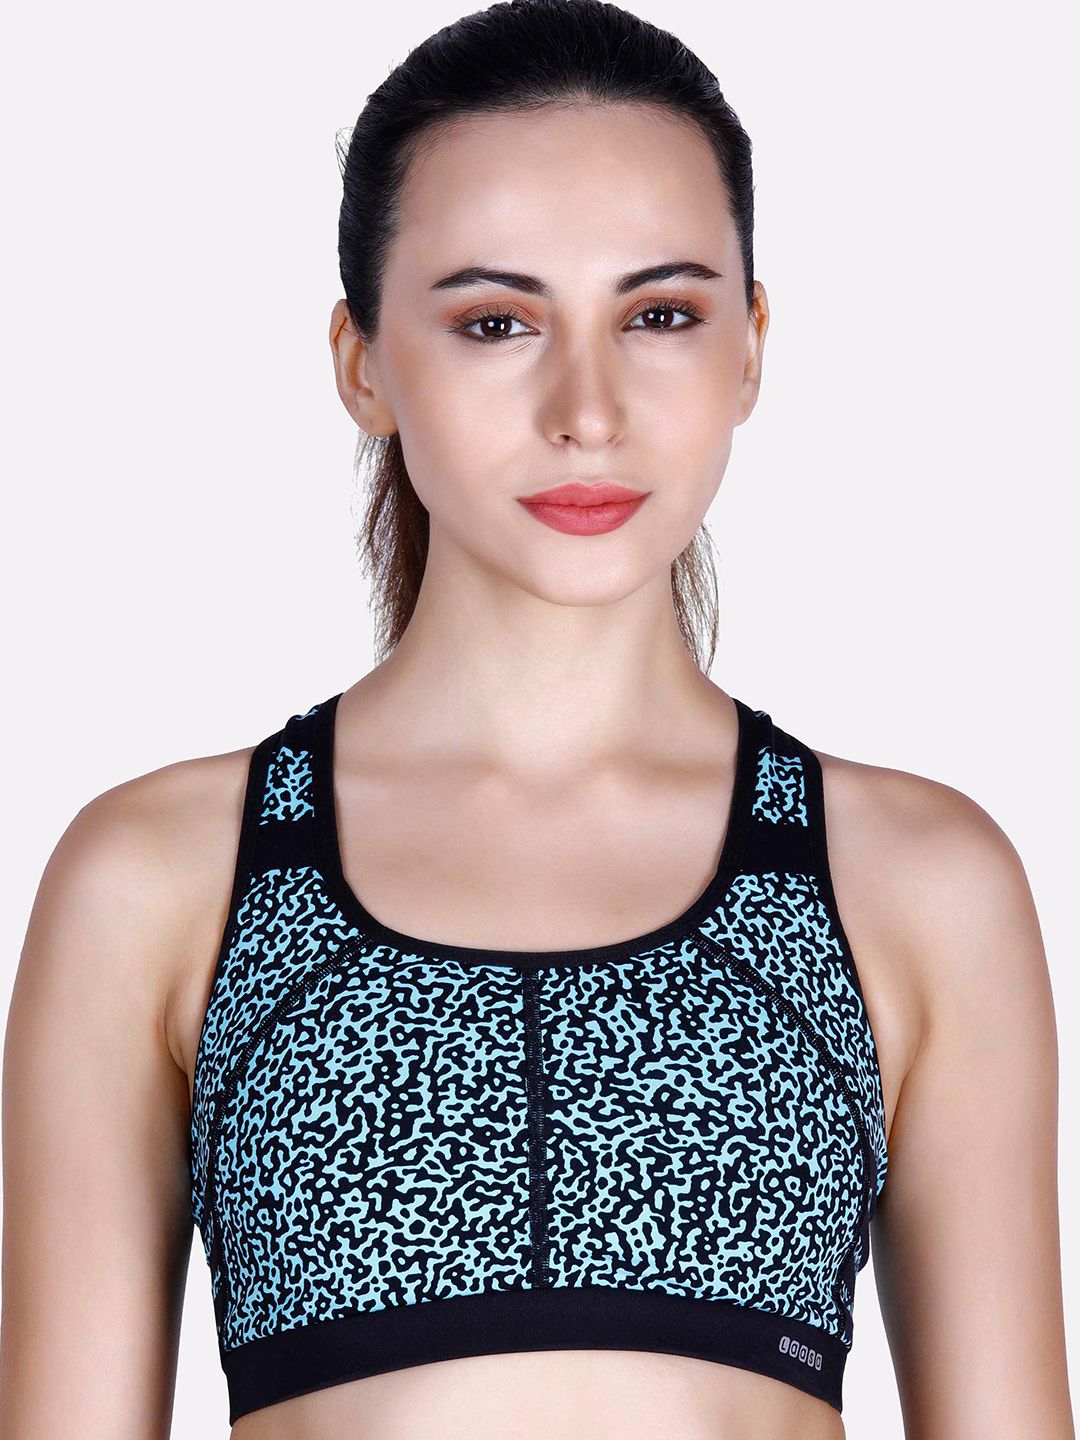 LAASA SPORTS Black & Blue Animal Printed Dry Fit Workout Bra Price in India